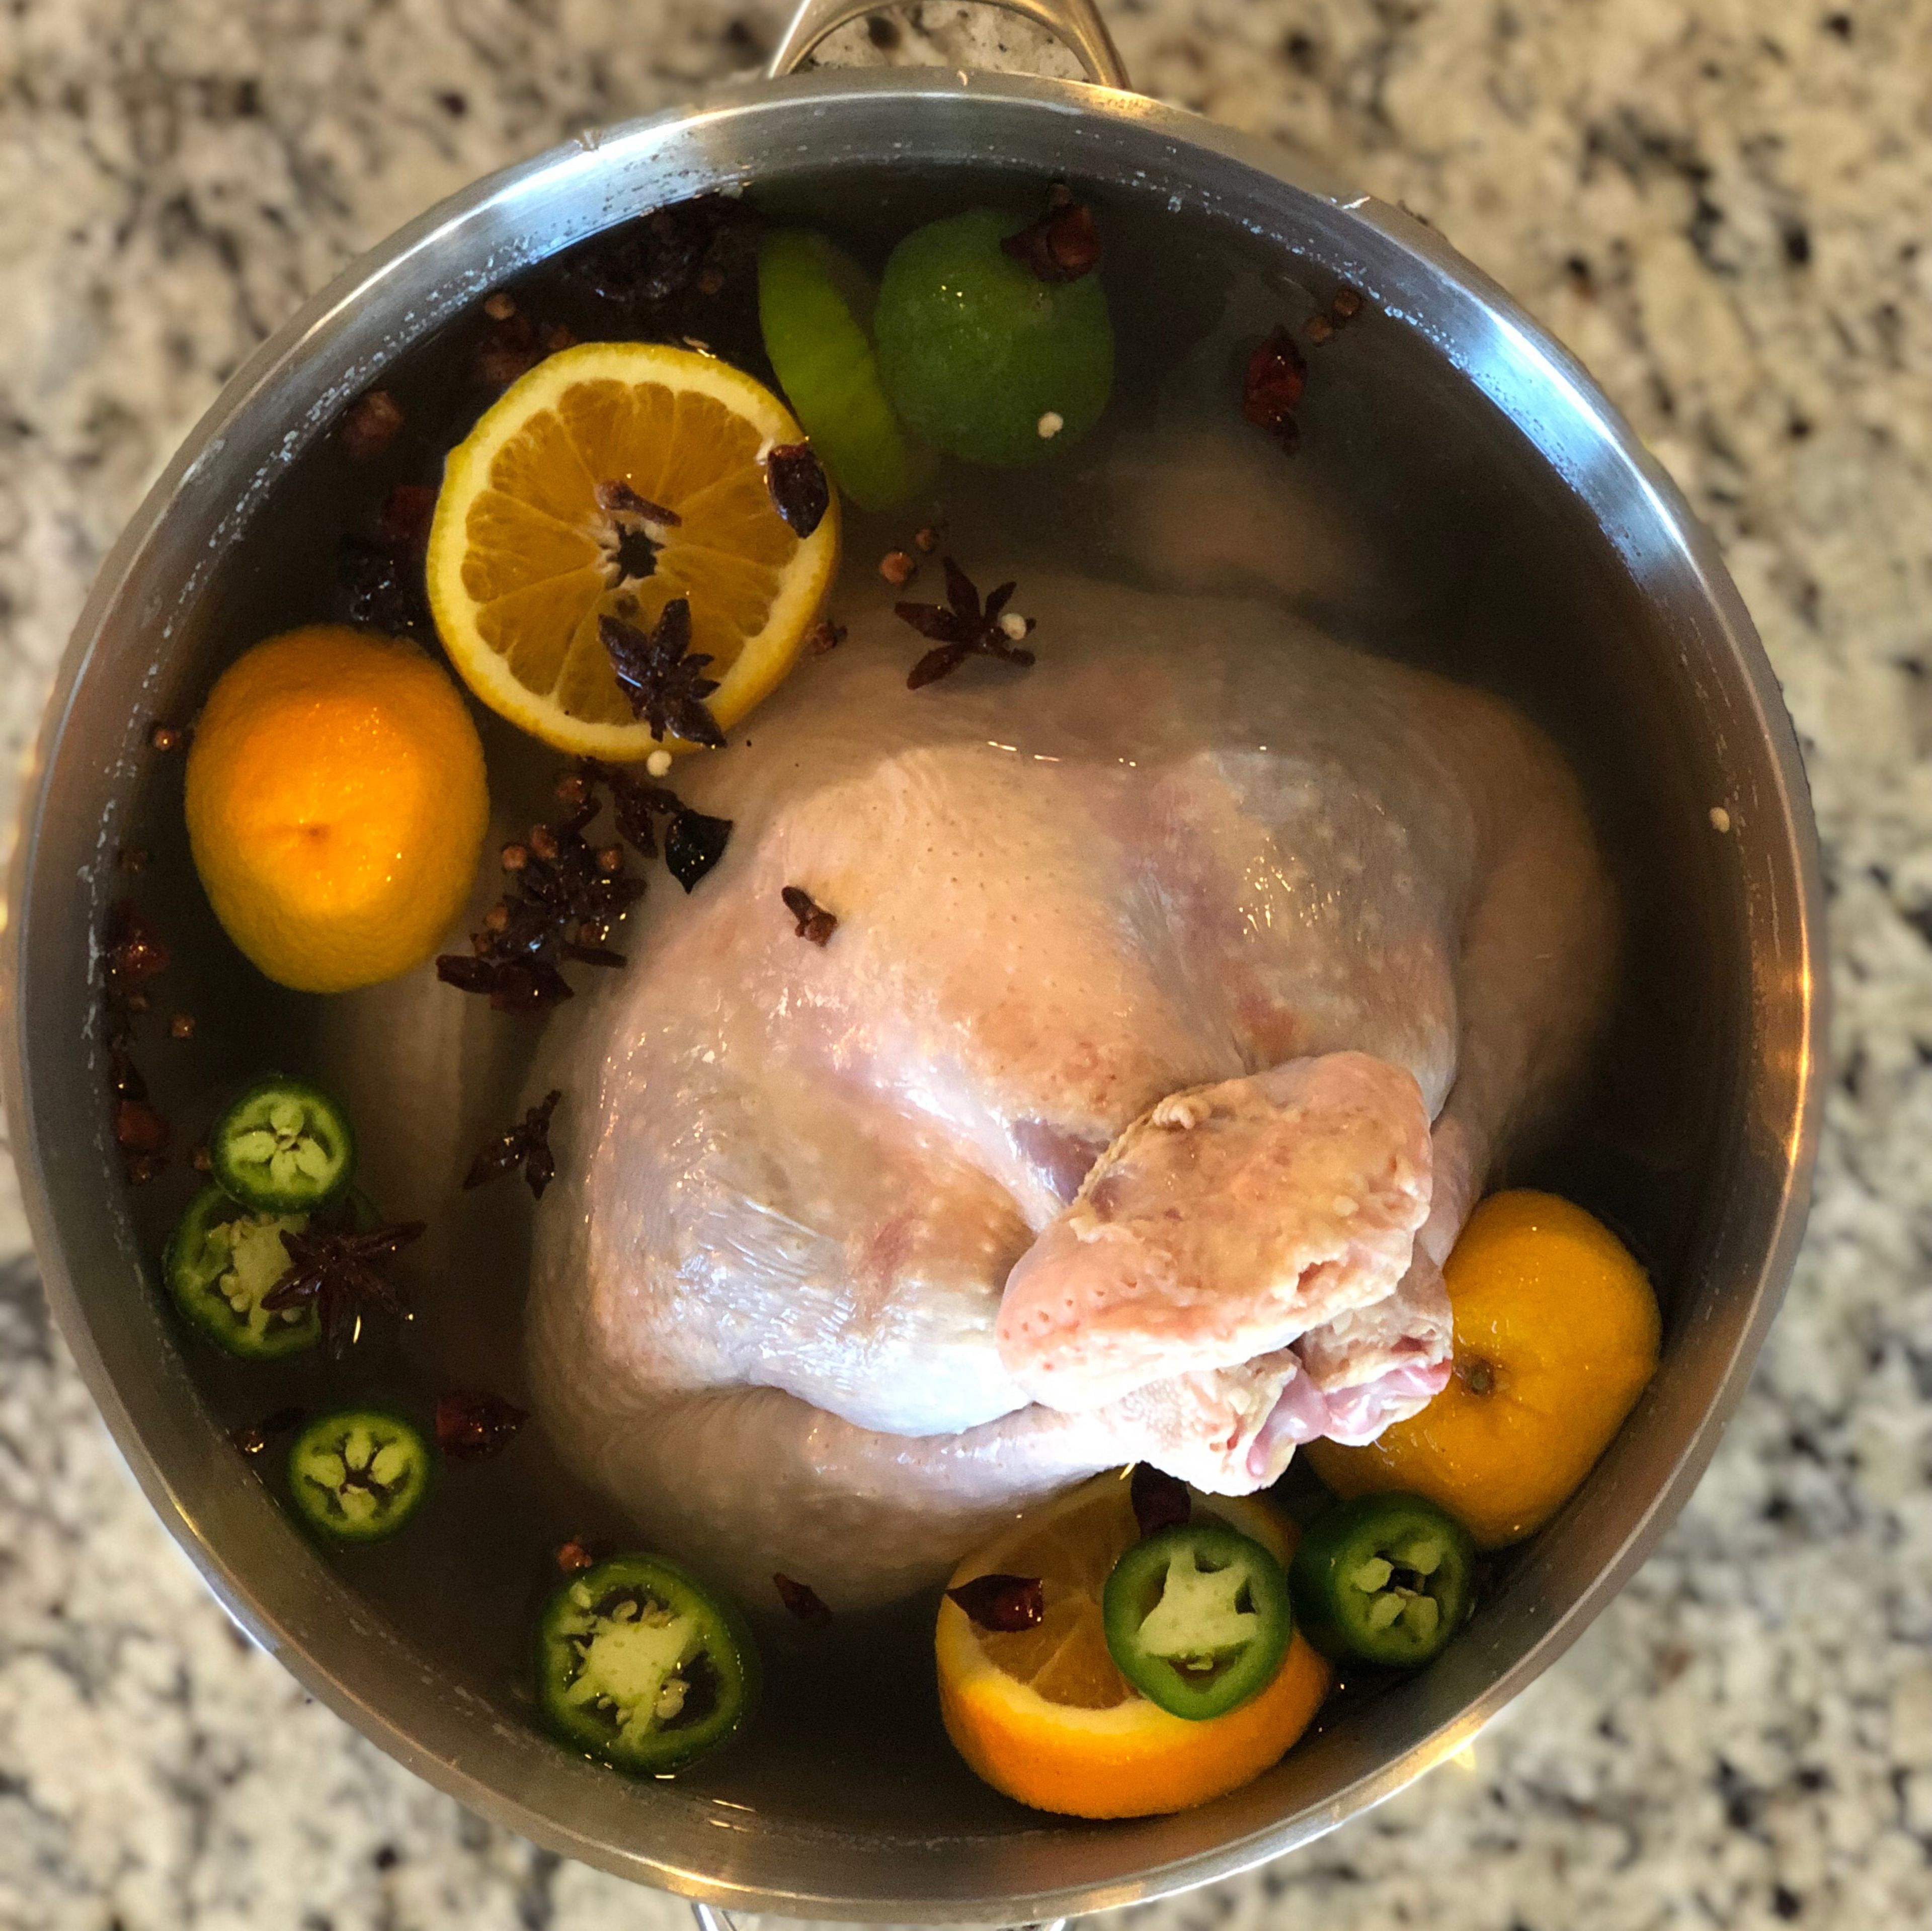 Move the brining base to a container that will hold the turkey and add the turkey to the brining base, add extra water until the turkey is completely submerged and put in the refrigerator for approximately 8 - 24 hours before cooking.